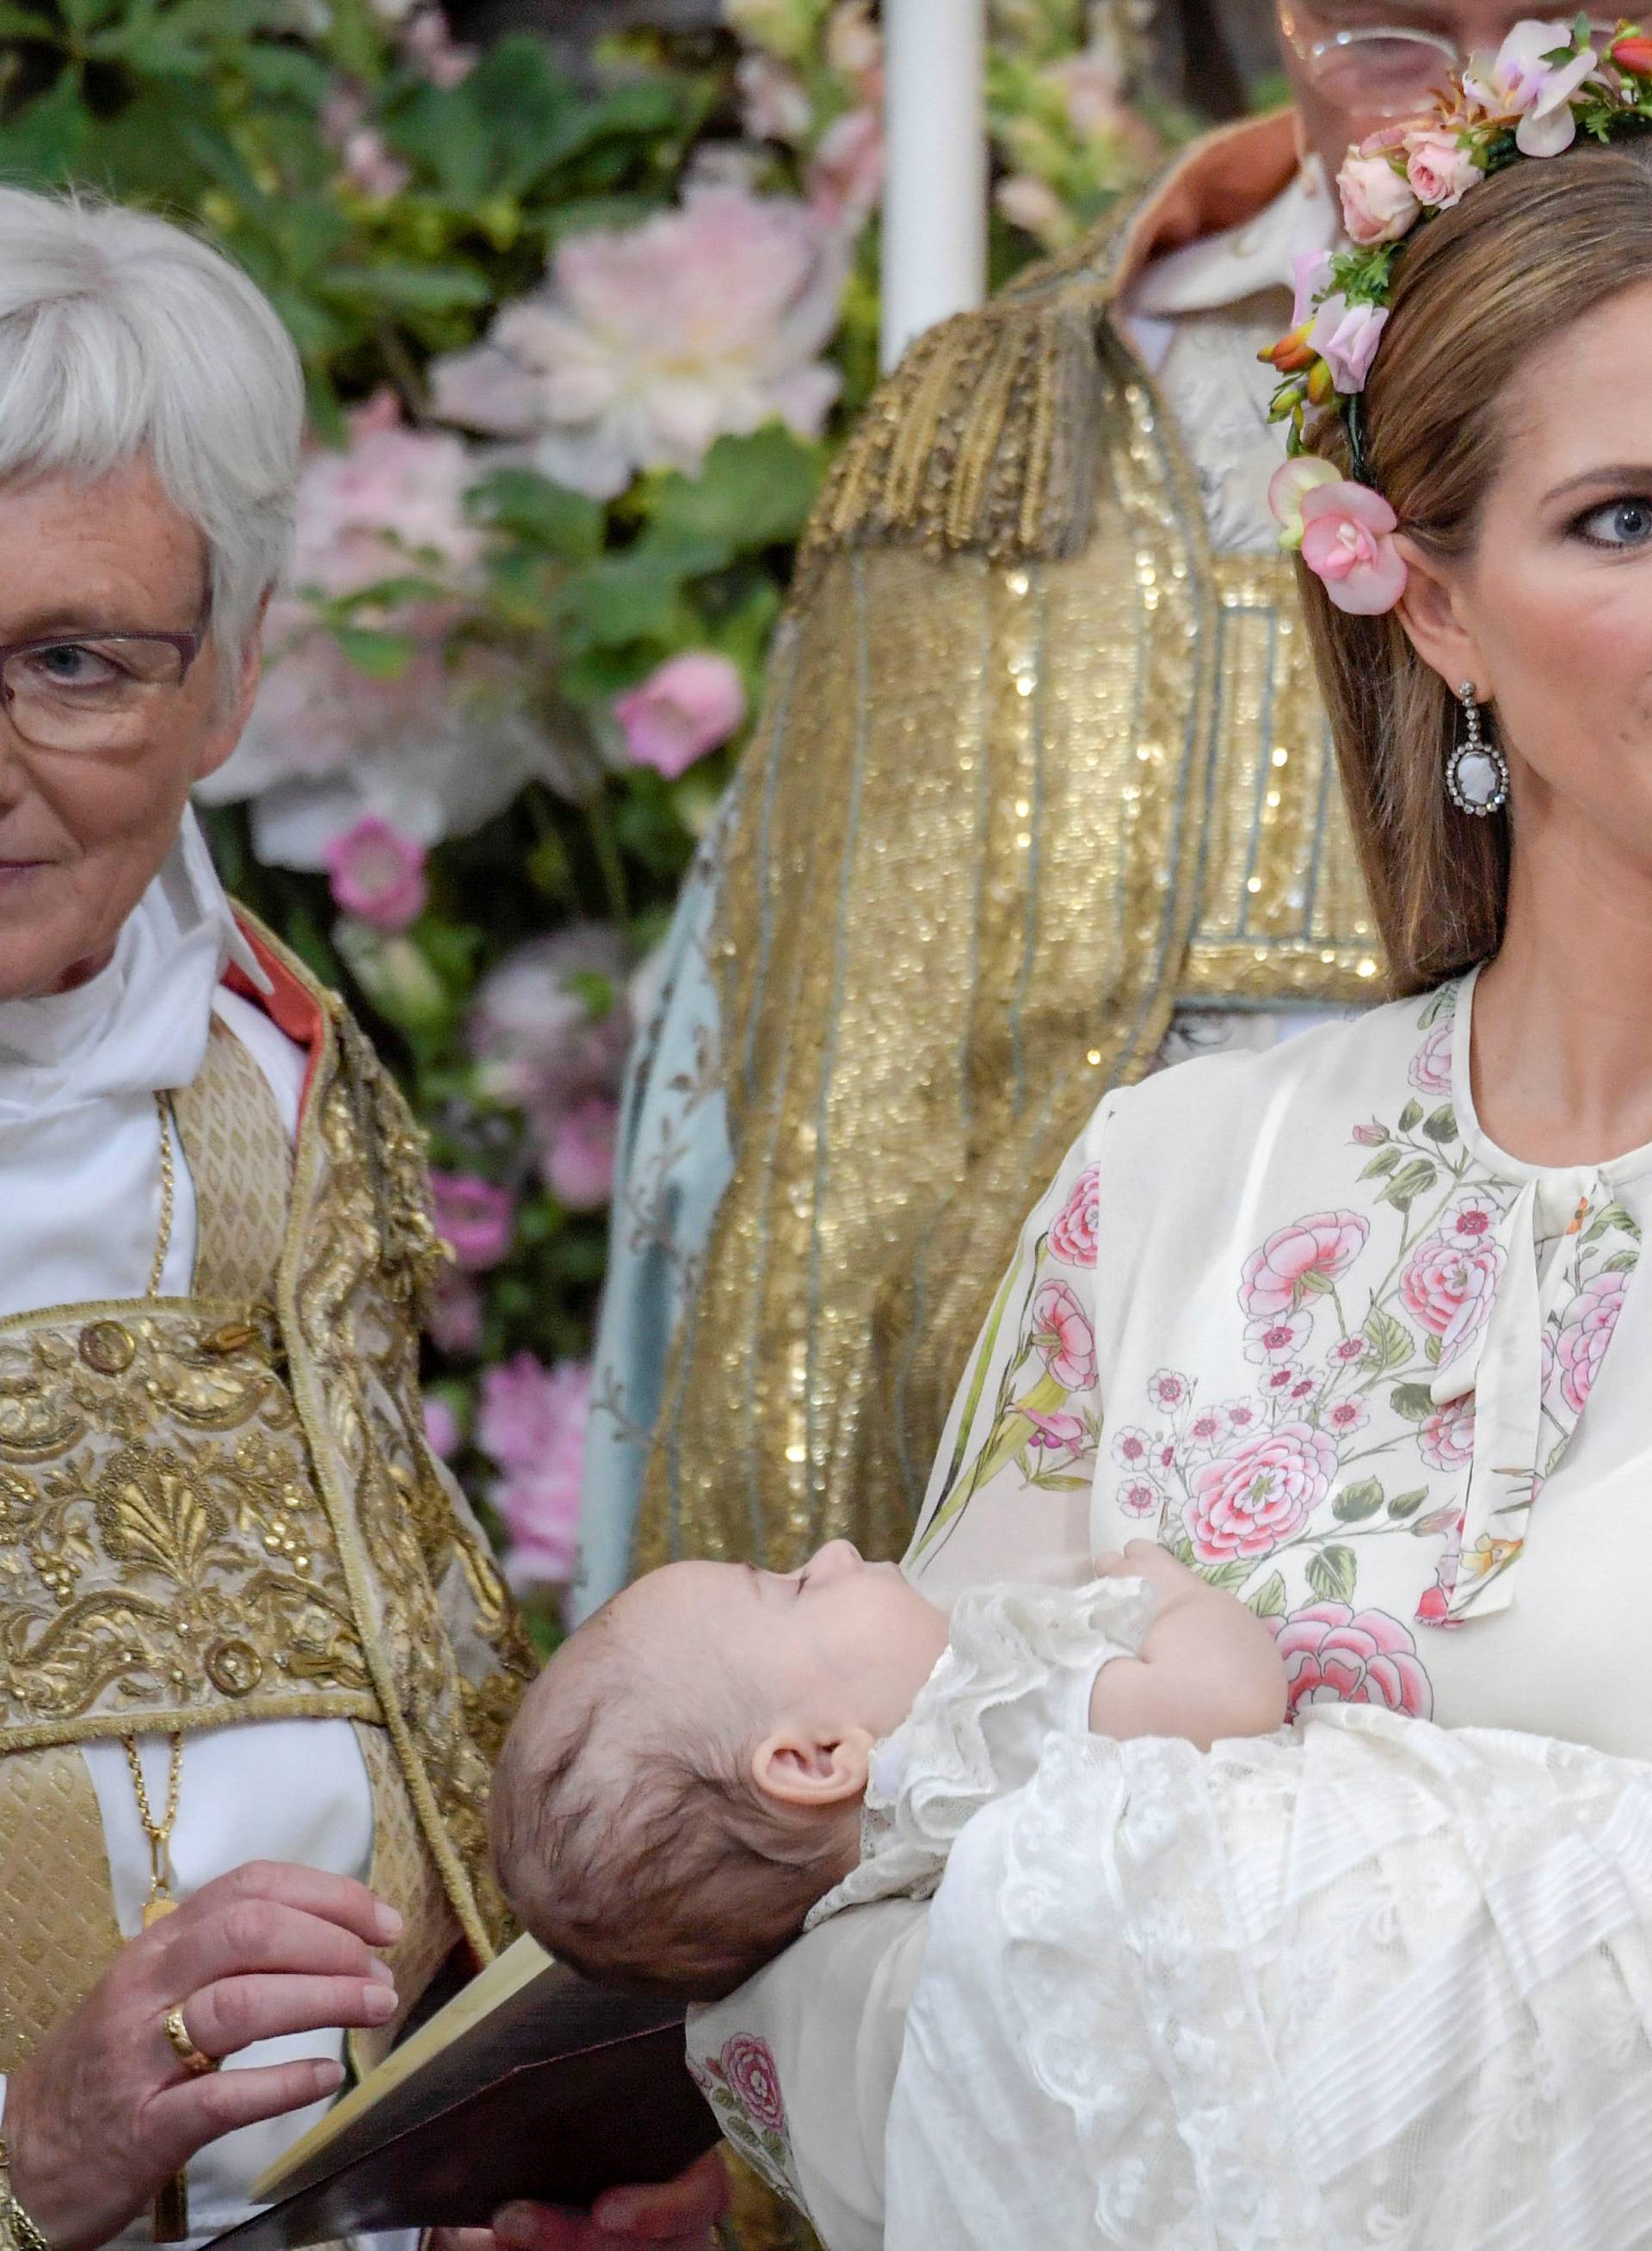 Princess Madeleine and officiant Archbishop Antje Jackelen are seen during  princess Adrienne's christening ceremony in Drottningholm Palace Chapel, Stockholm